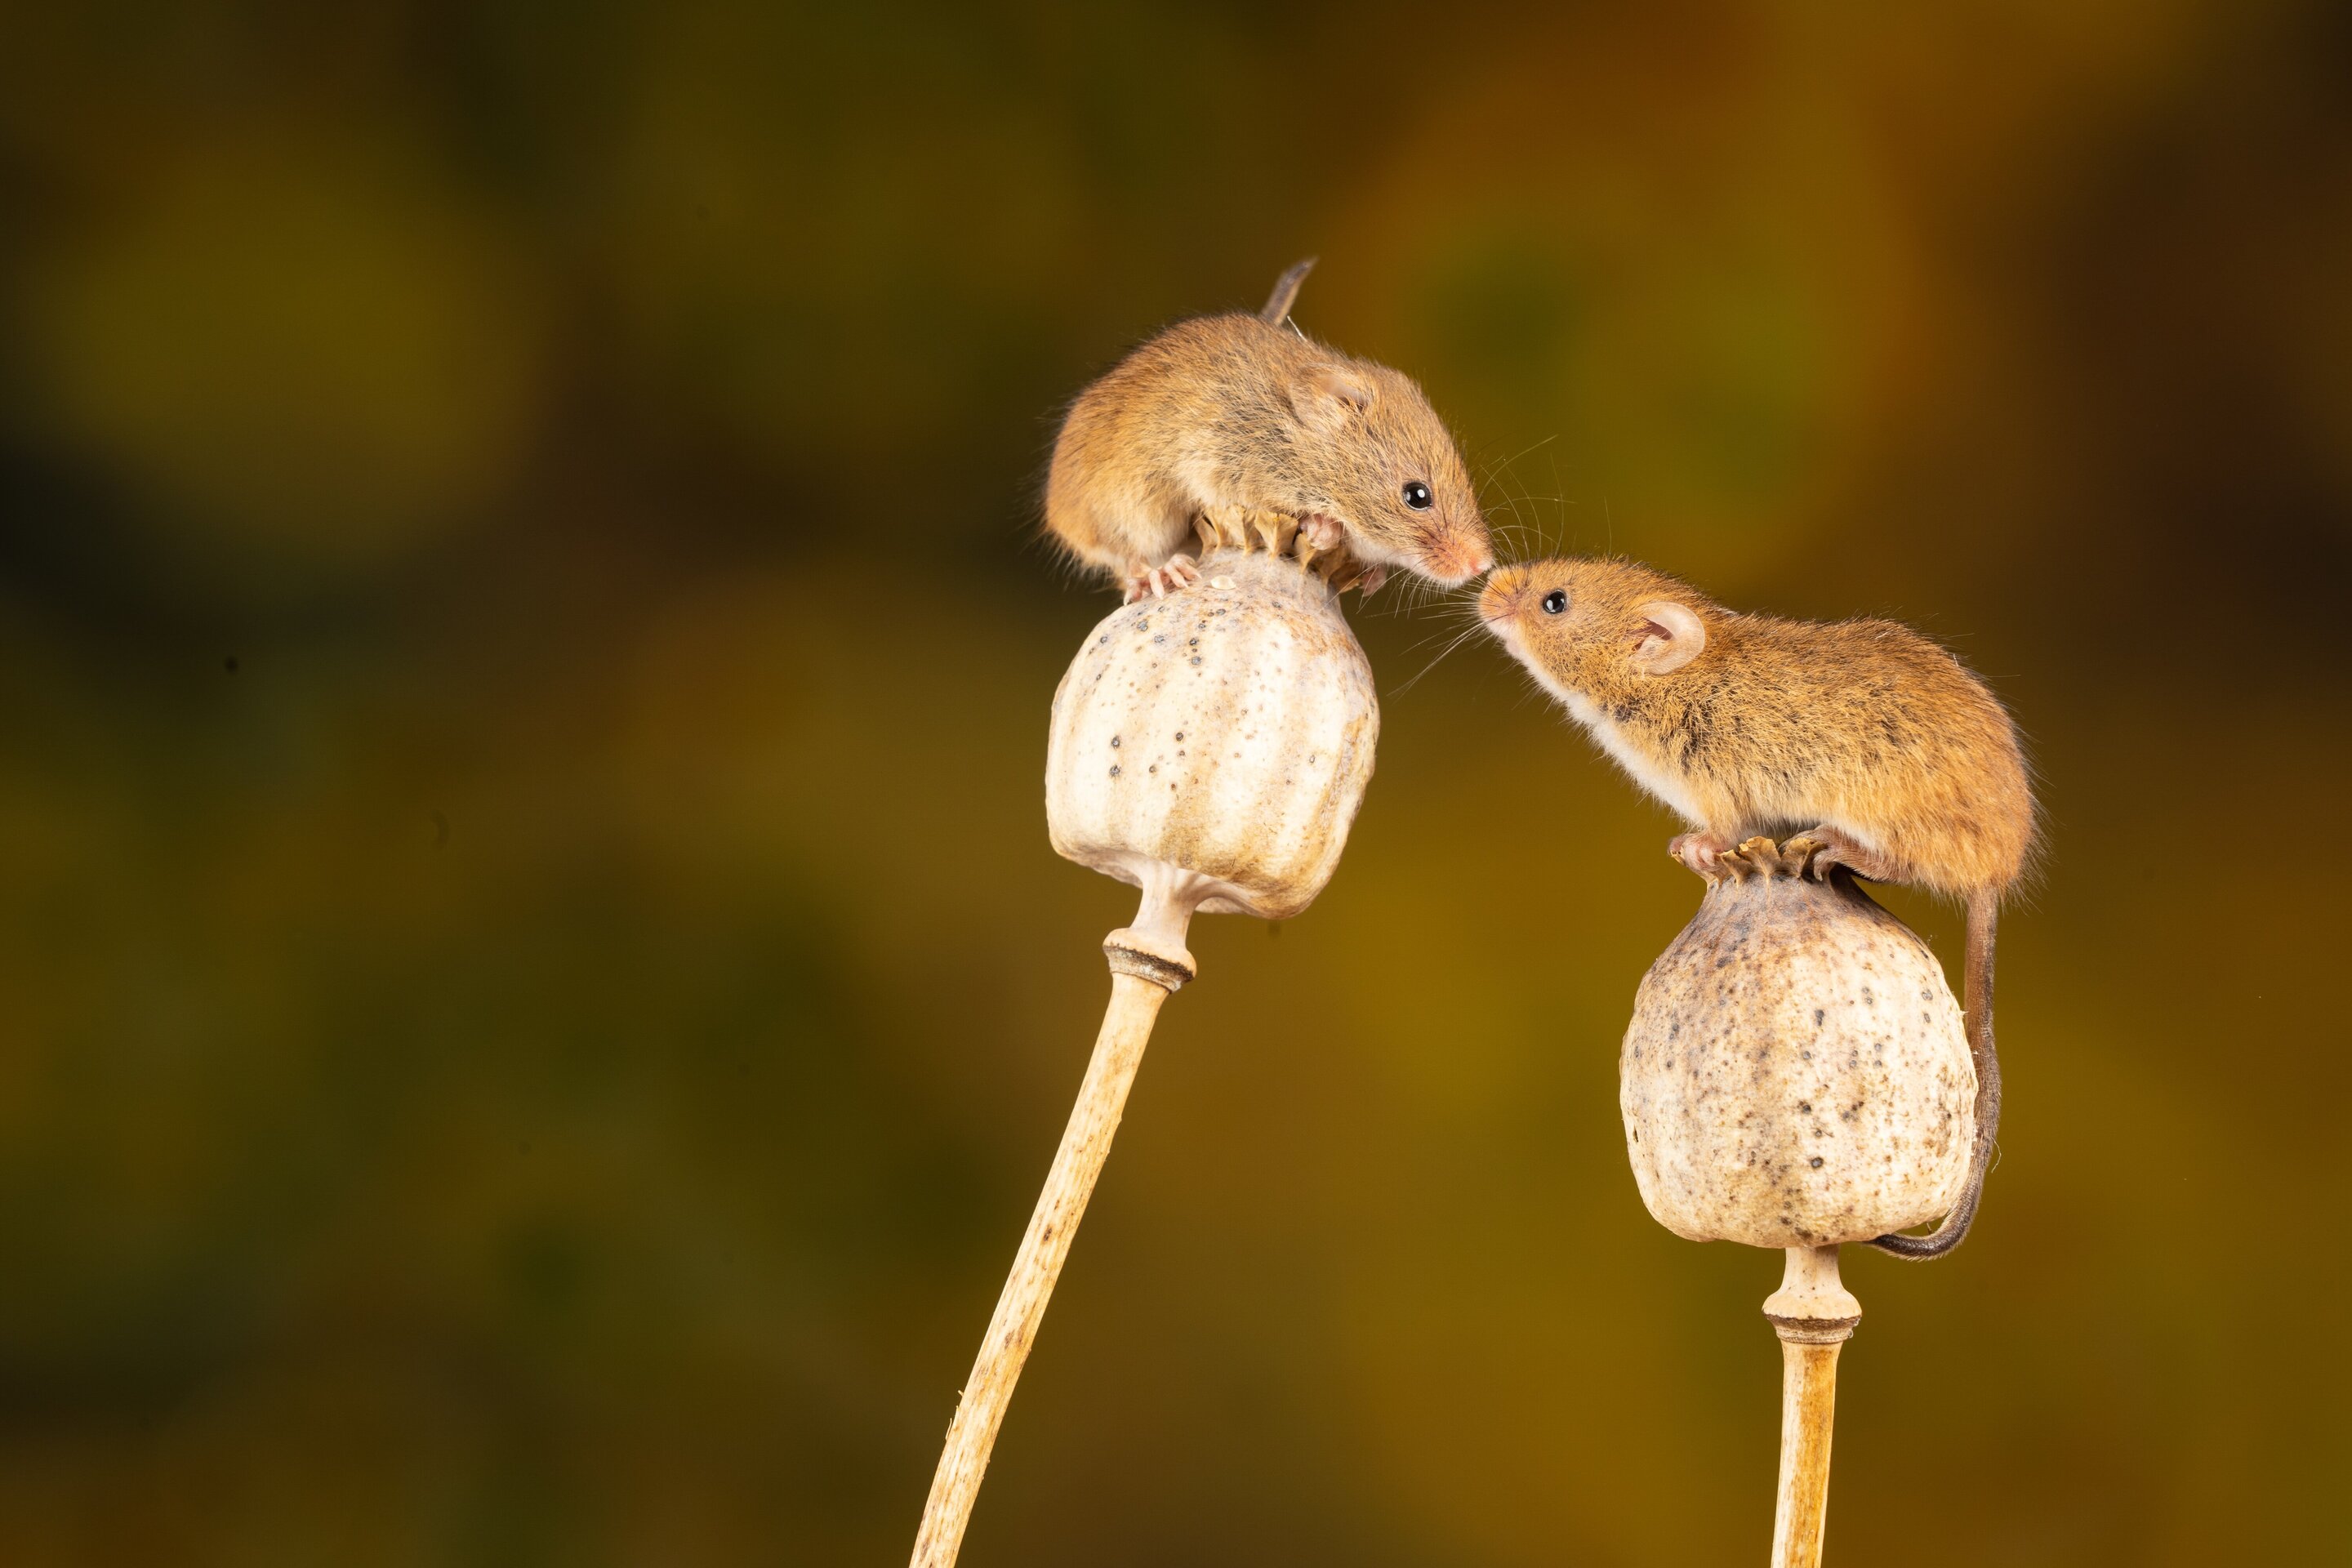 'Fight or flight' – unless internal clocks are disrupted, study in mice shows